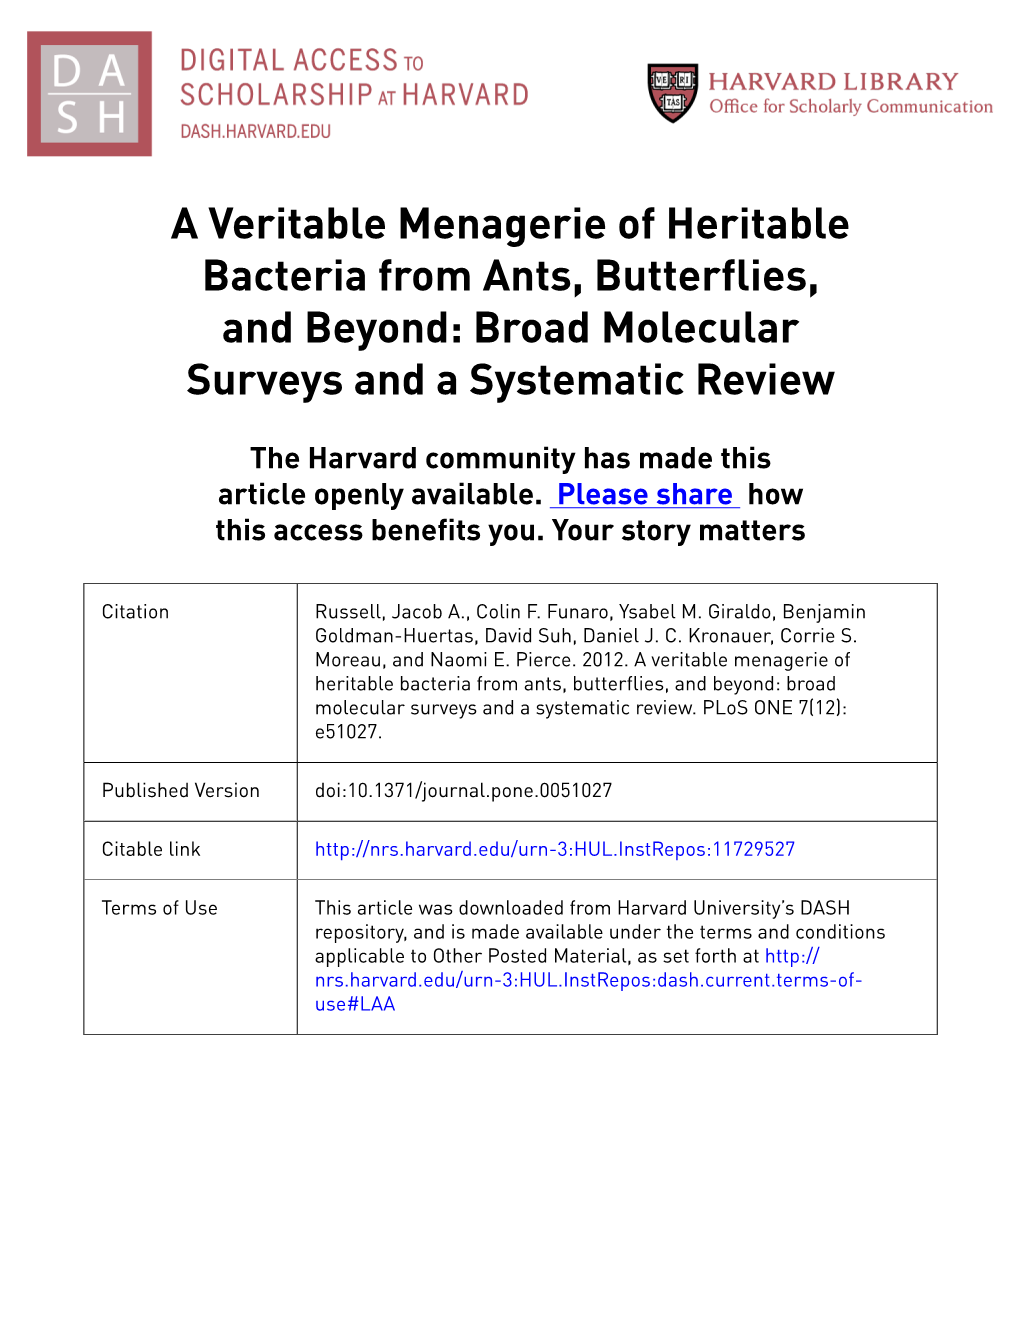 A Veritable Menagerie of Heritable Bacteria from Ants, Butterflies, and Beyond: Broad Molecular Surveys and a Systematic Review